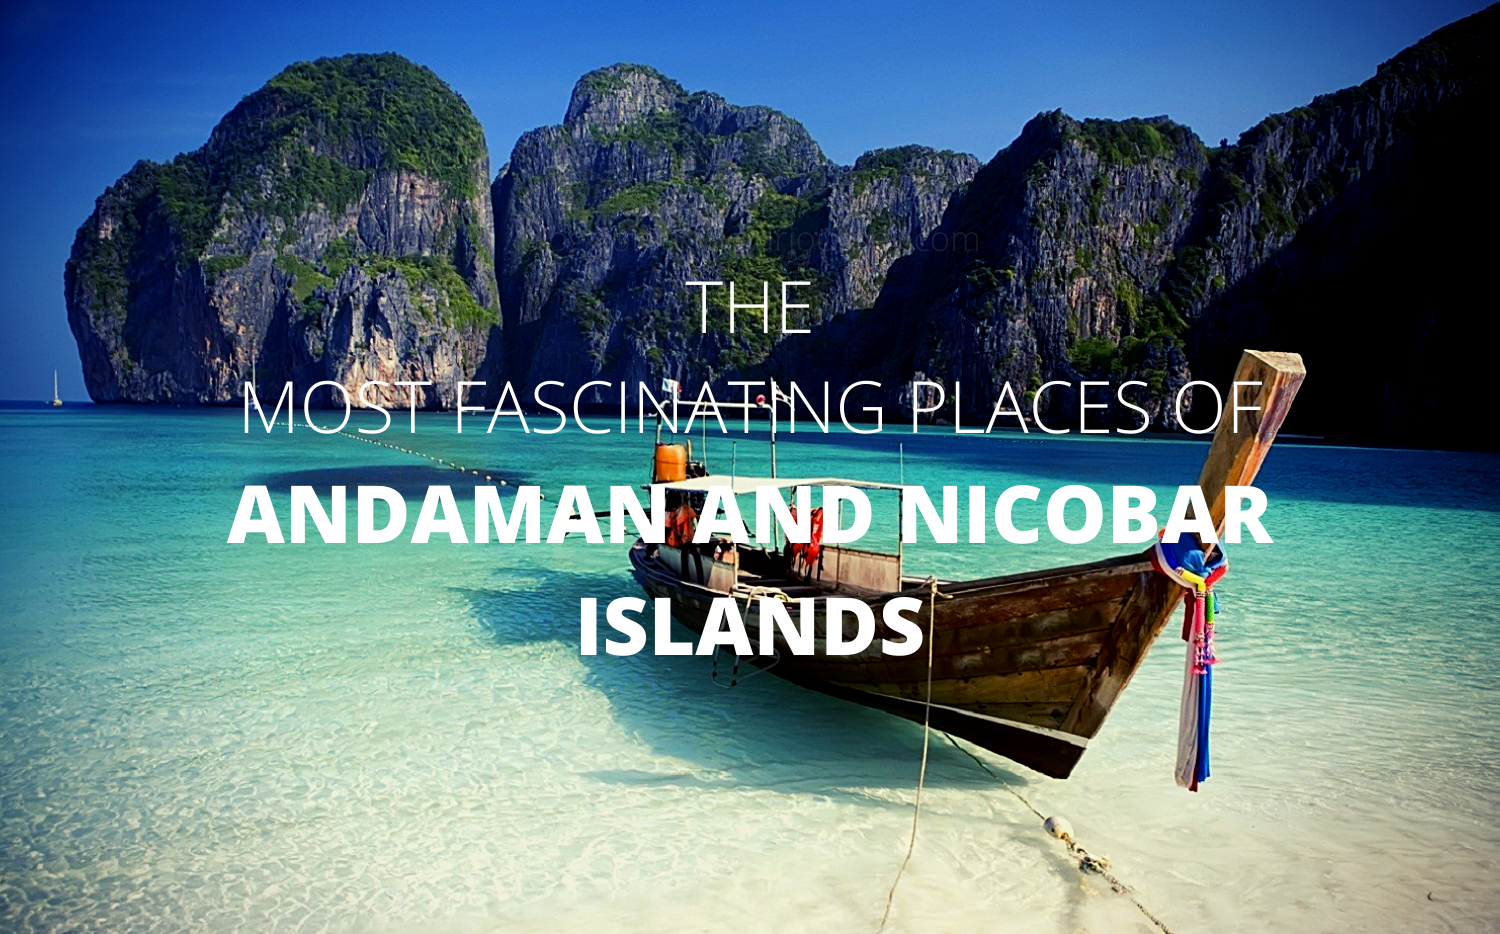 Venture Through The Most Fascinating Places Of Andaman And Nicobar Islands